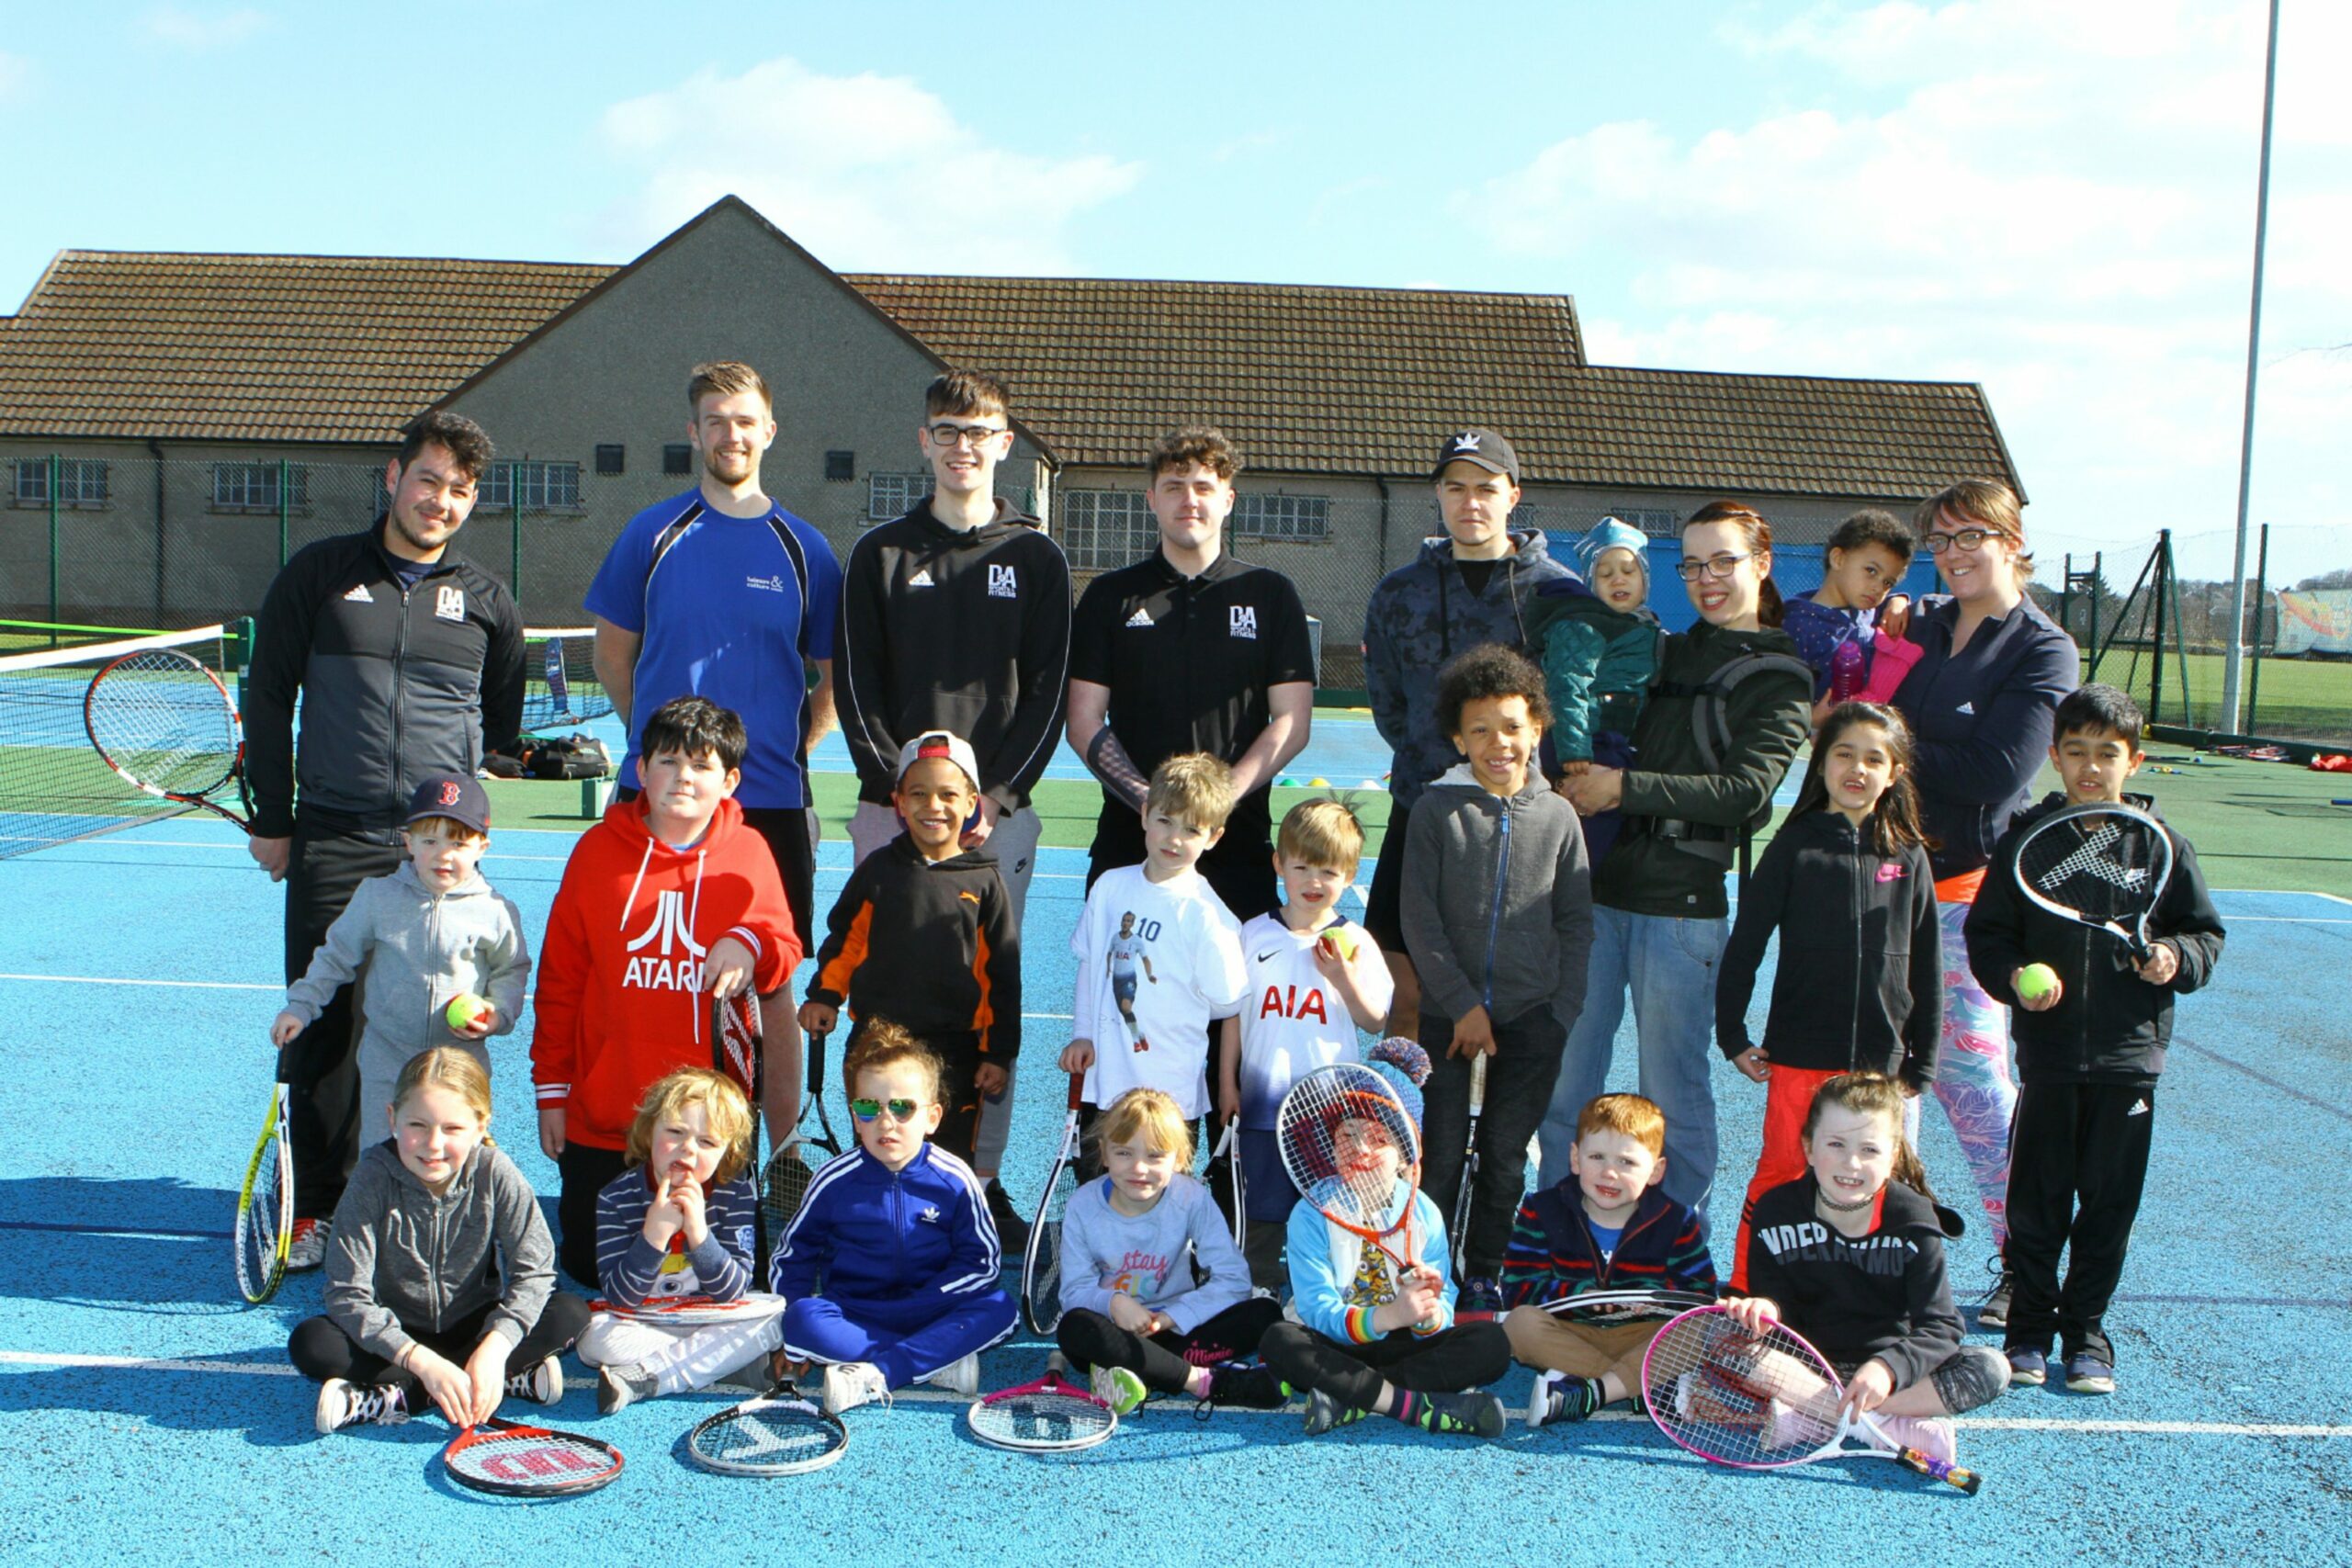 Children and staff at a tennis weekend